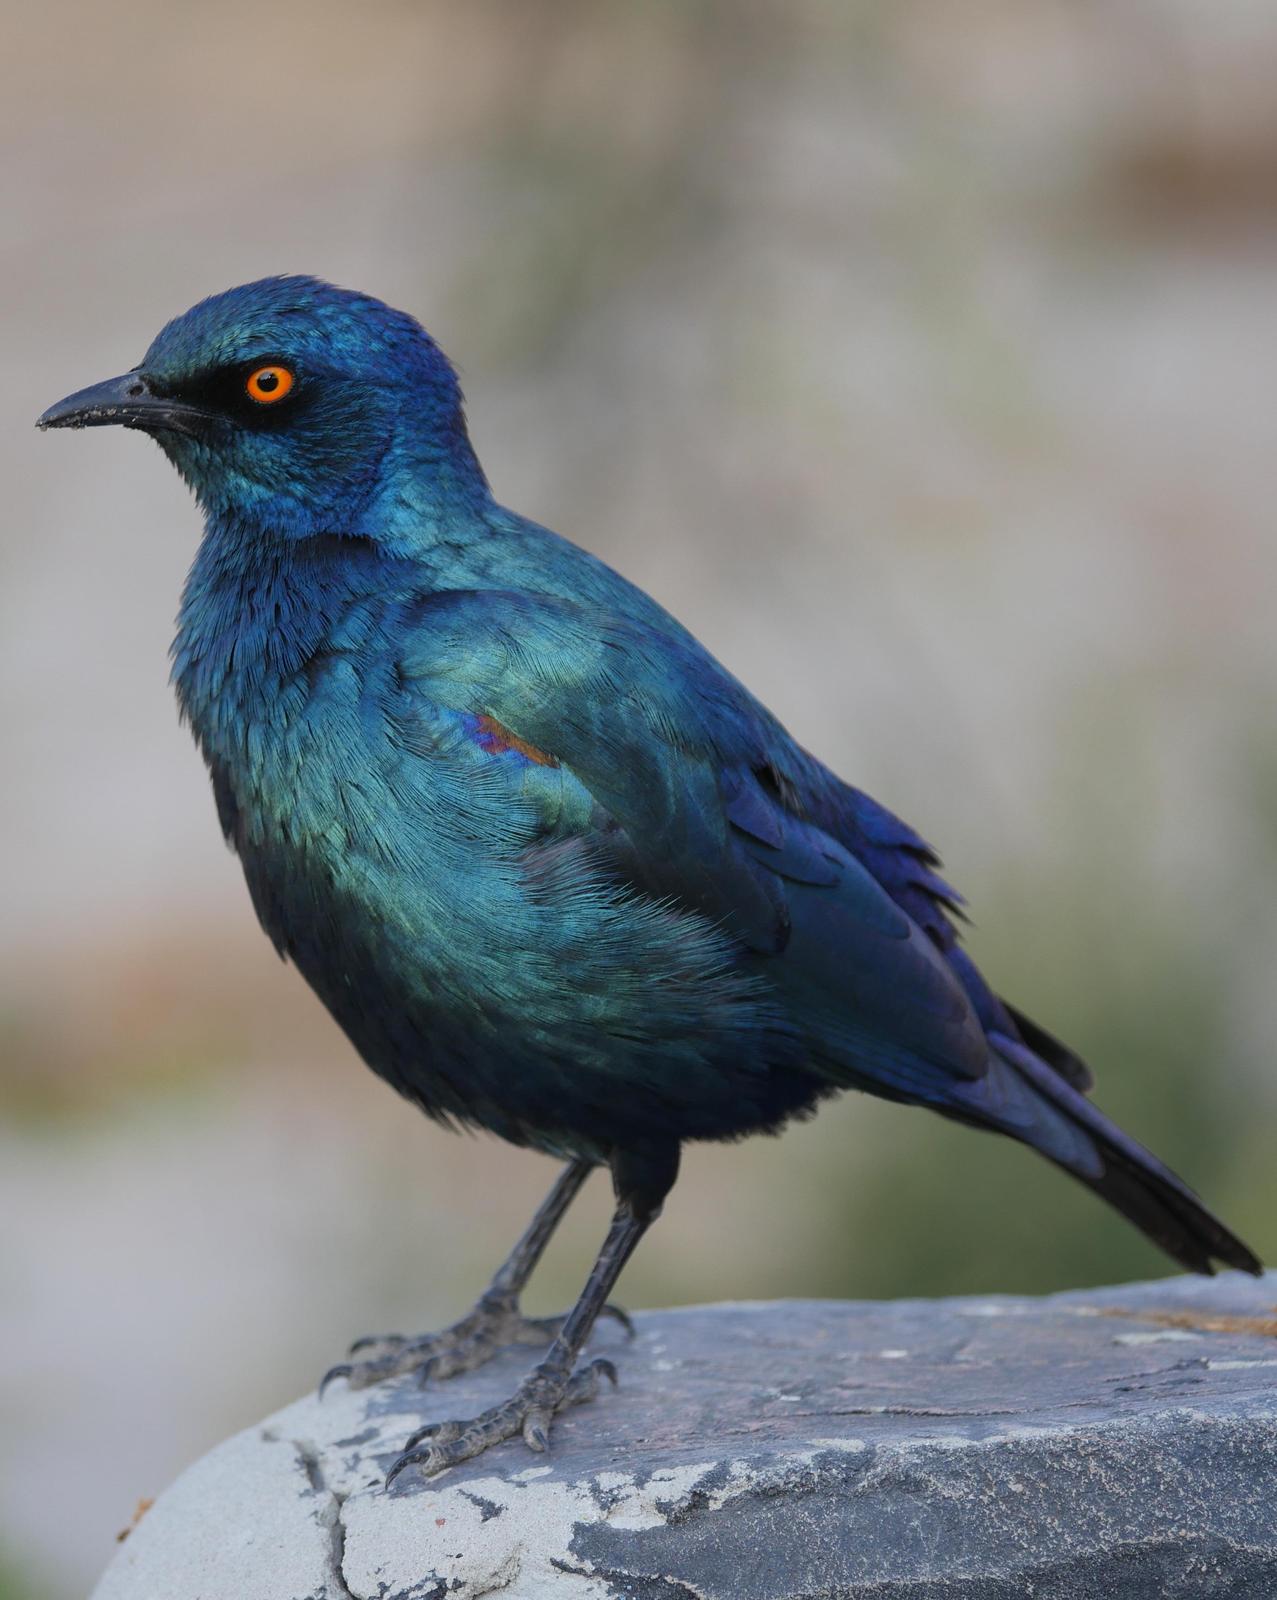 Cape Starling Photo by Peter Lowe